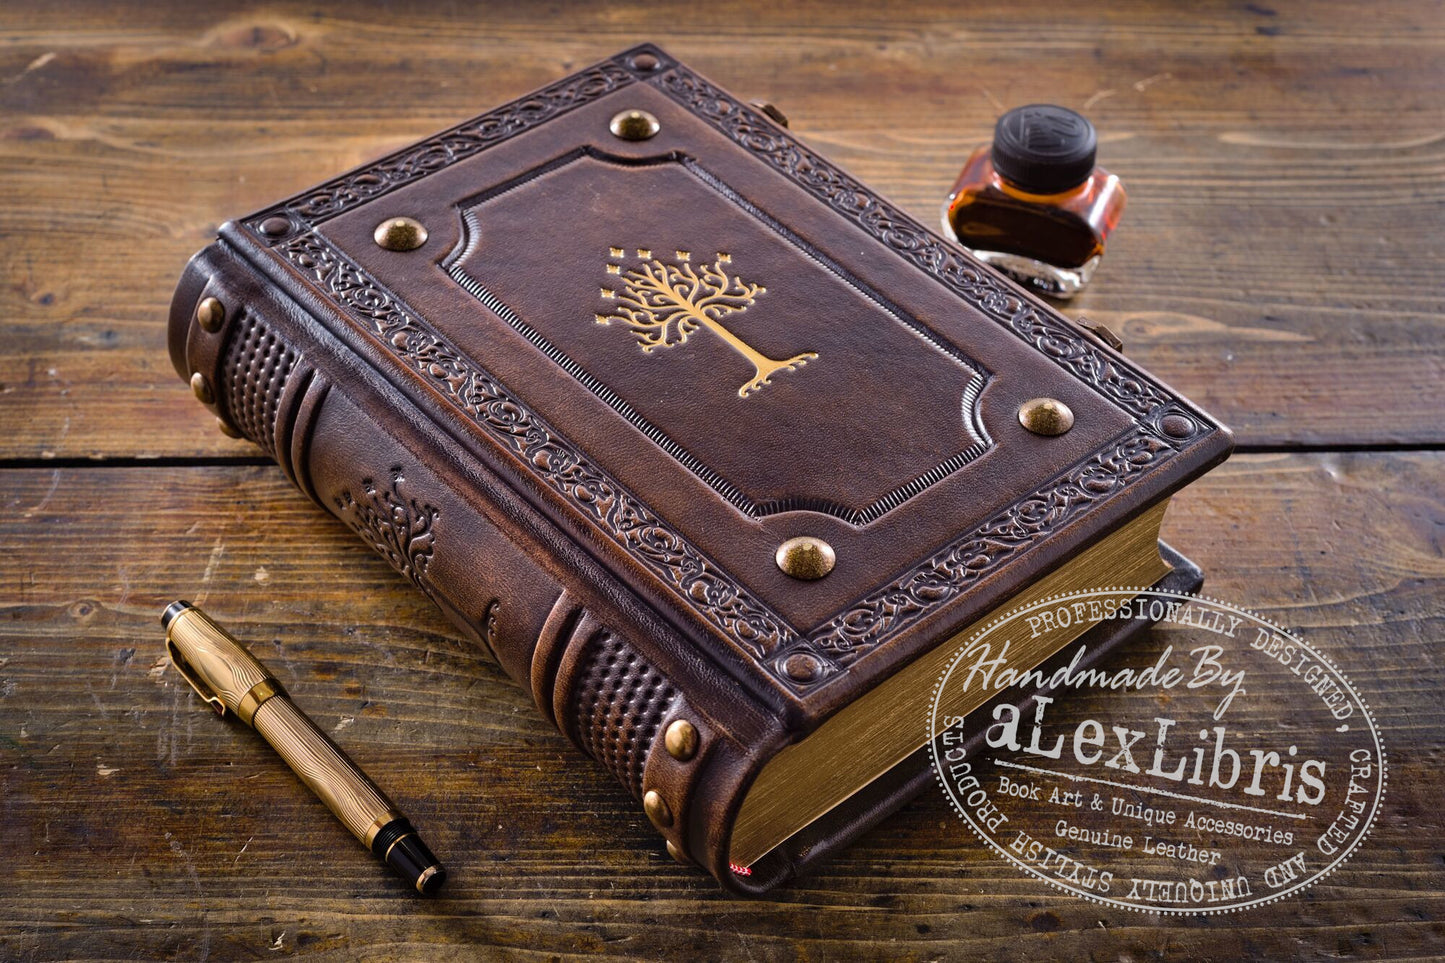 Gondor Tree Leather Journal: Large 7.5 x 10 Inches, 600 Blank Pages - Realm of Gondor with this Antiqued Leather Journal